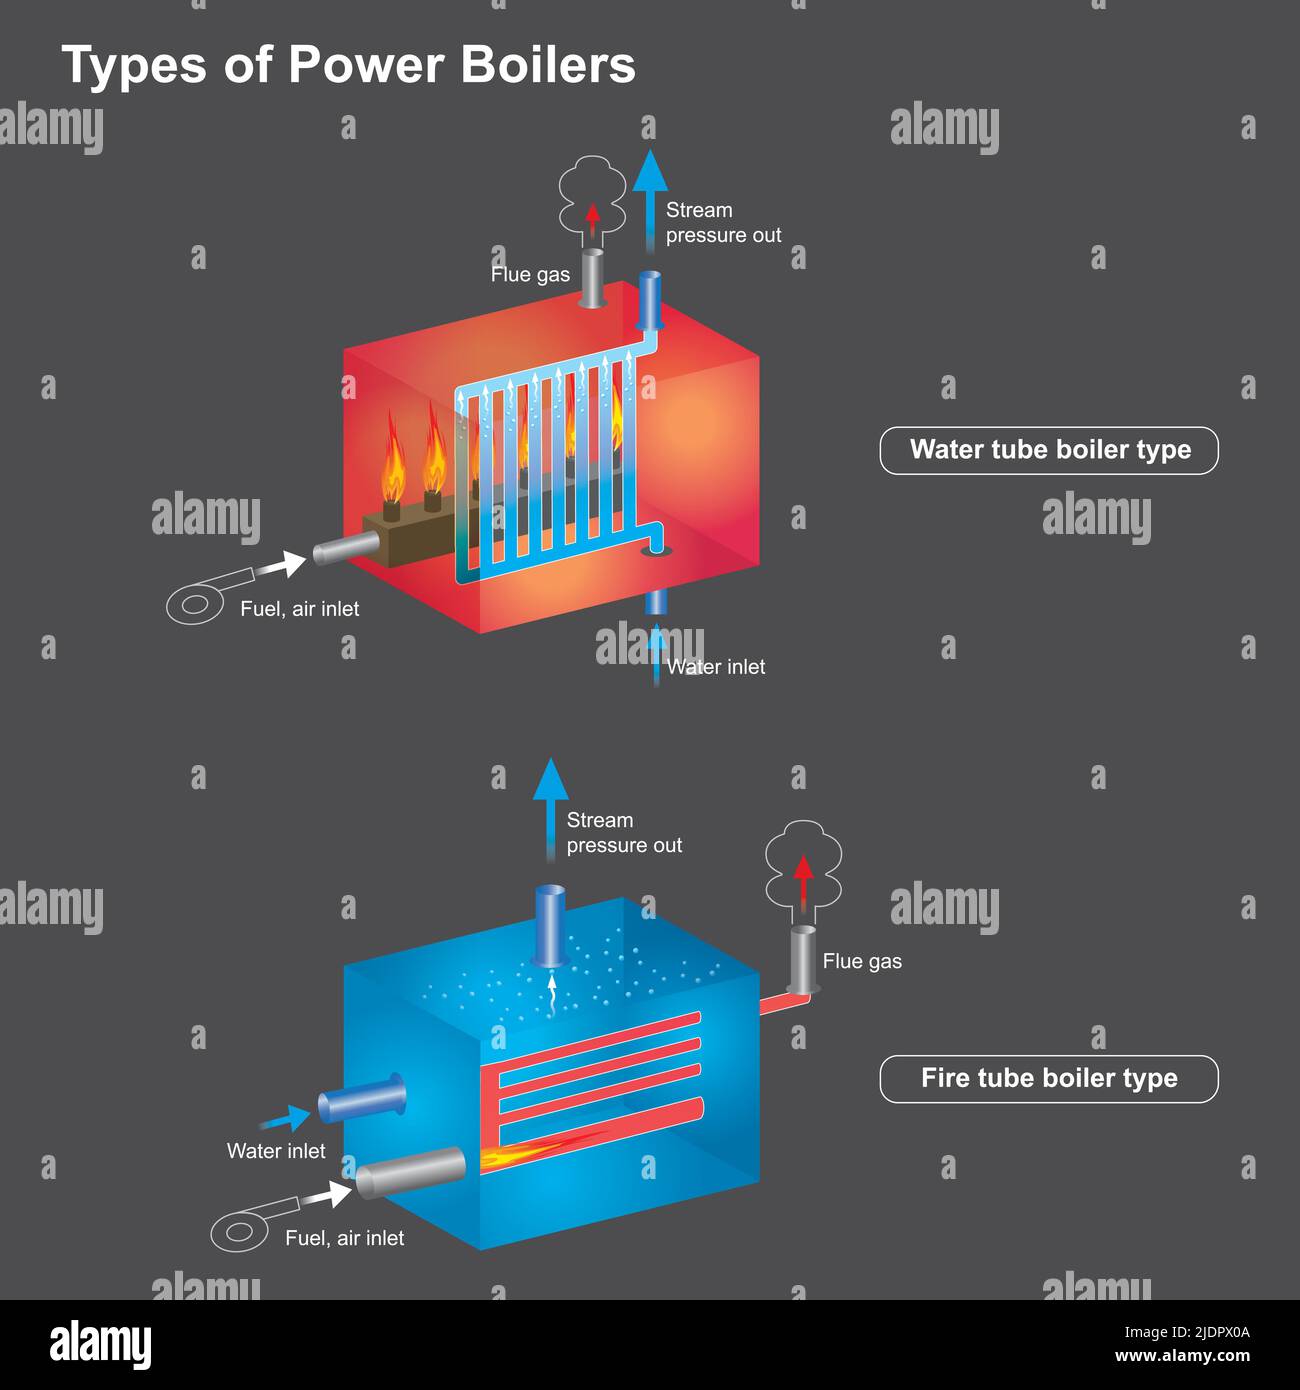 Types of power boilers. a boiler that works by burning fuel. then transfer the heat generated to the water in the pressure tank. Stock Vector